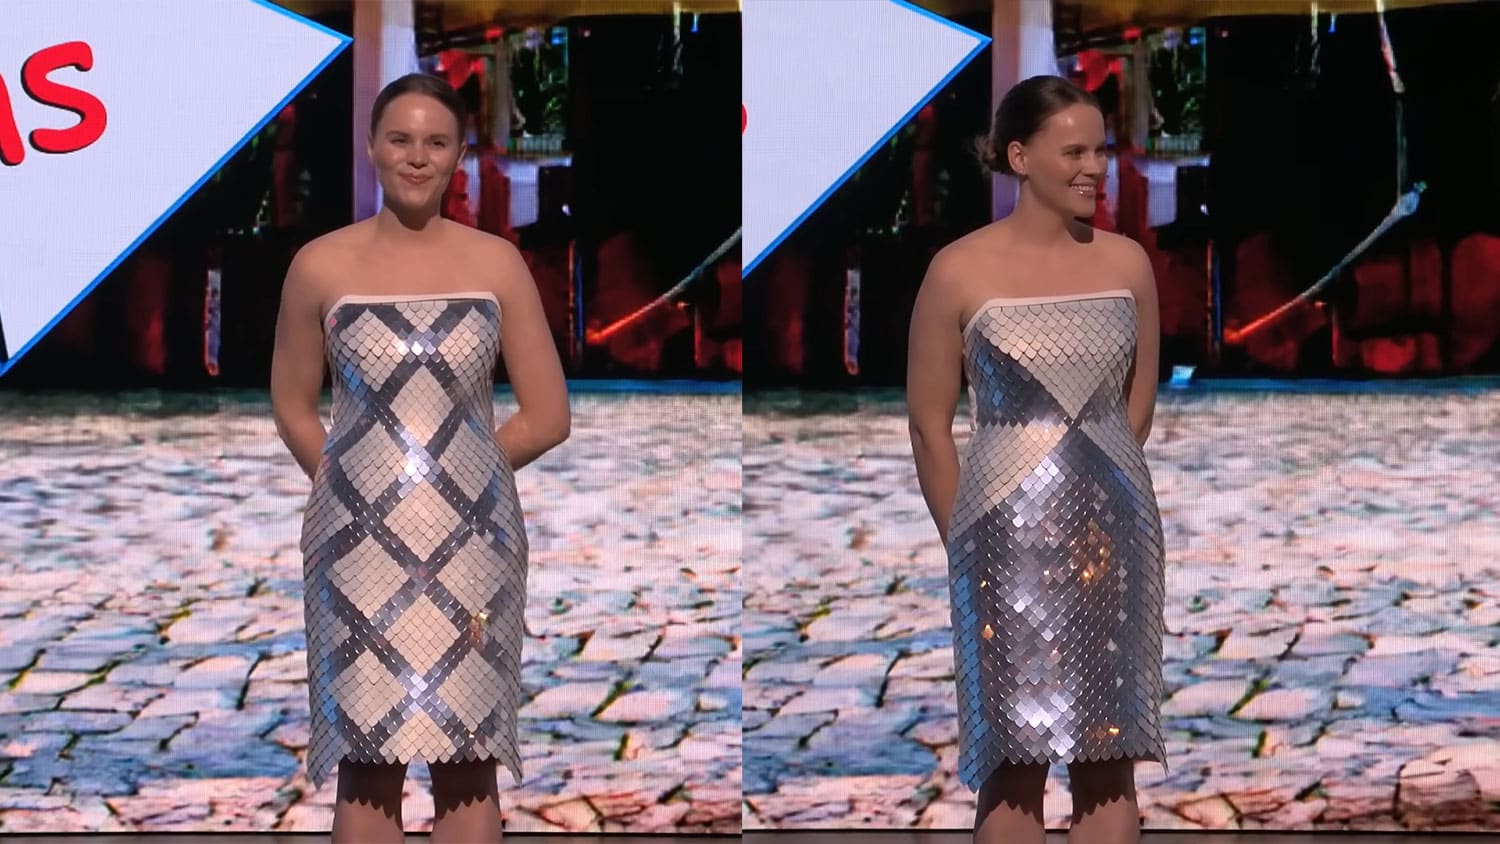 Adobe unveiled Project Primrose, an interactive dress that changes design and style in real time.